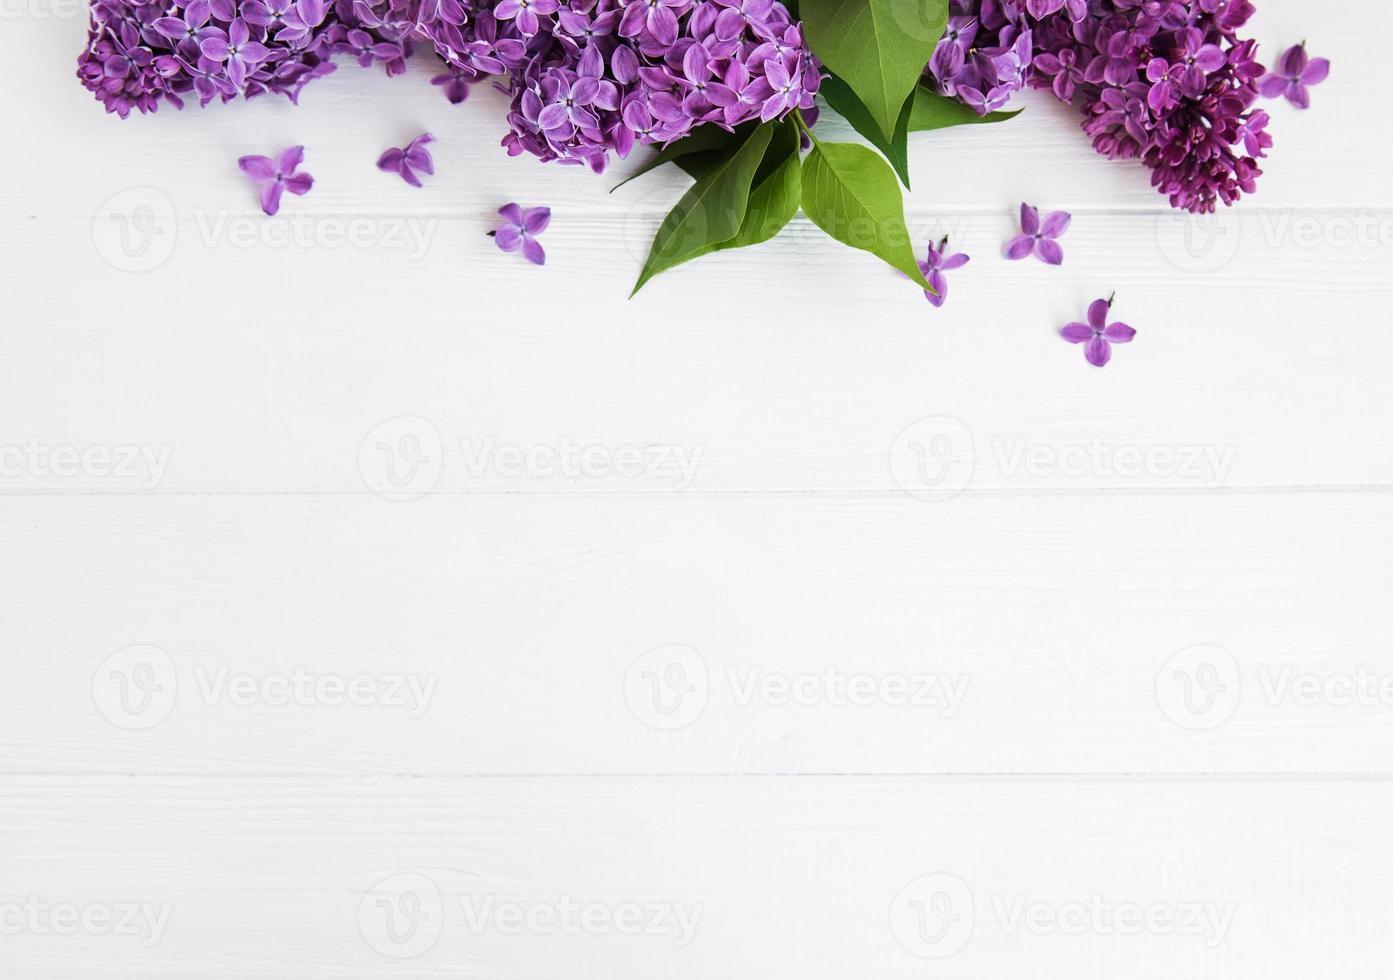 Lilac flowers on a table photo